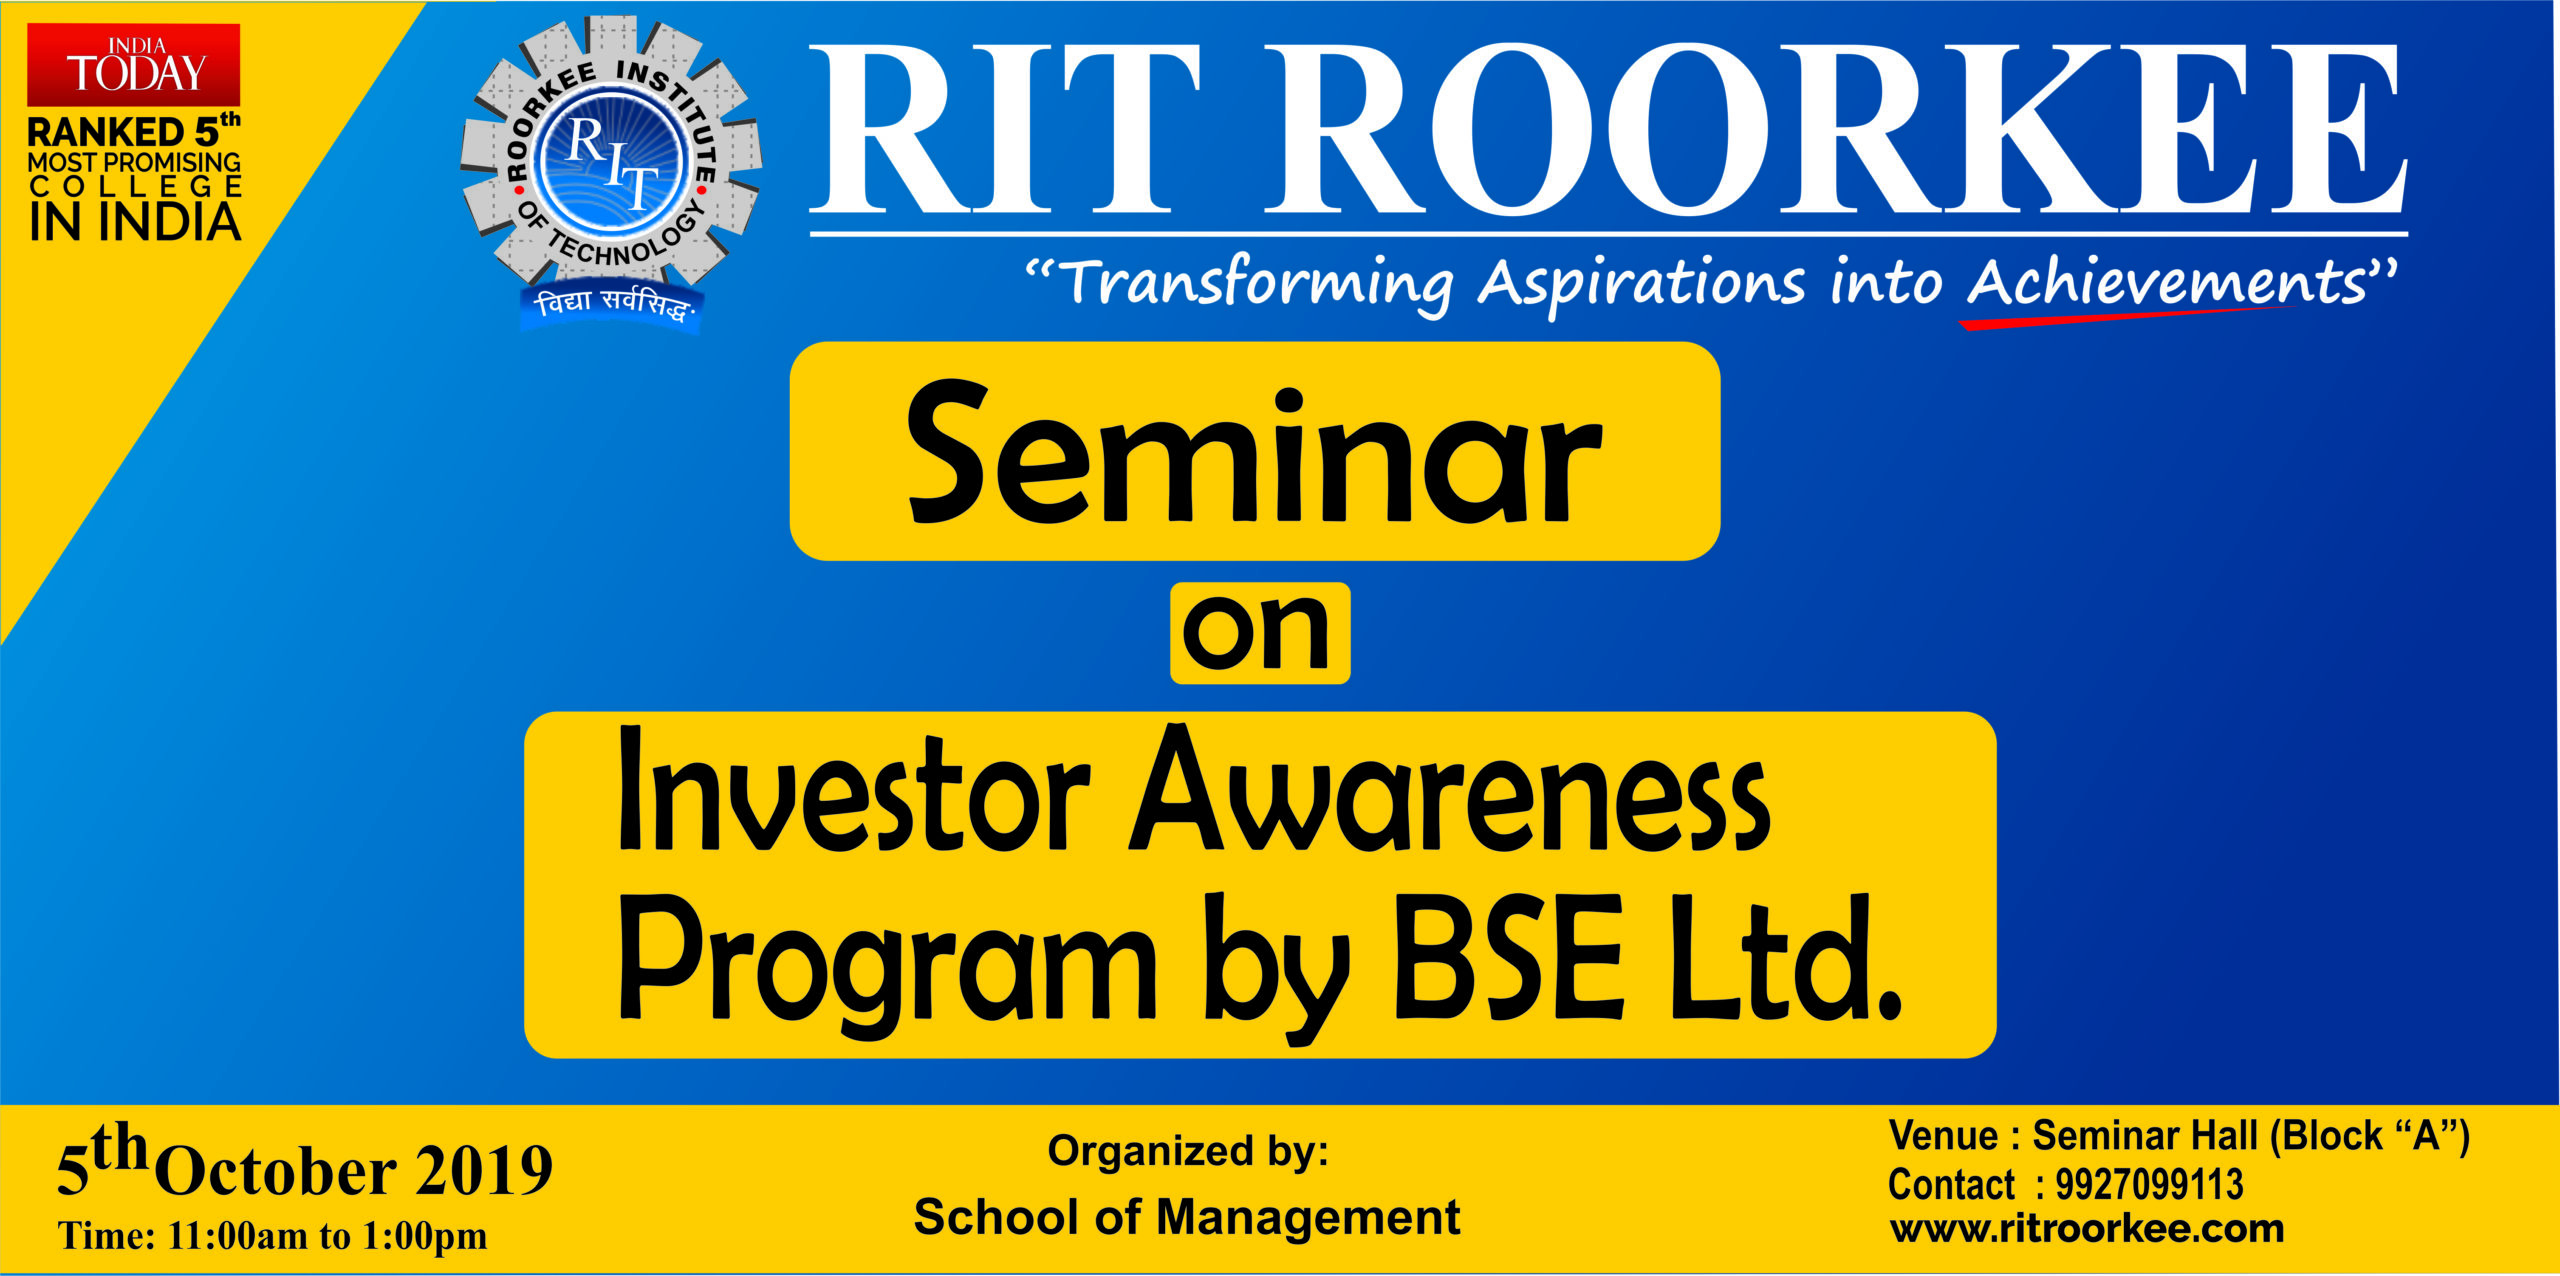 Seminar on "Investment Awareness Program" by BSE Ltd. at RIT